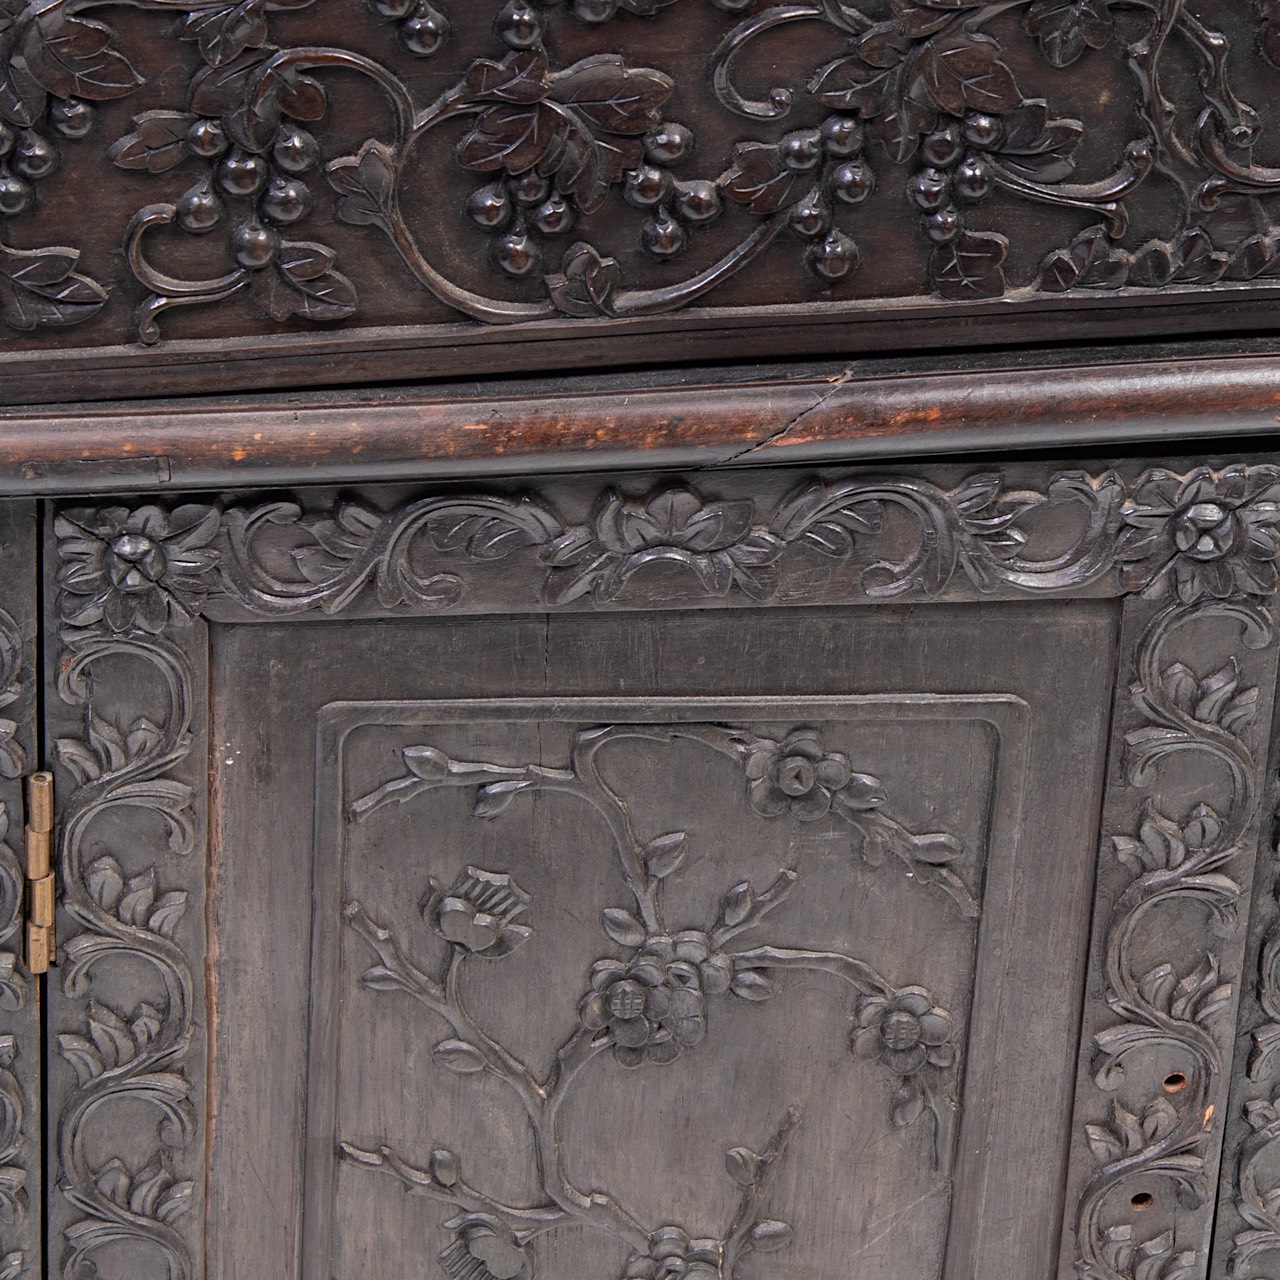 A compact South Chinese carved hardwood writing desk, 19thC, H 83 - W 66 - D 62 cm - Image 10 of 10